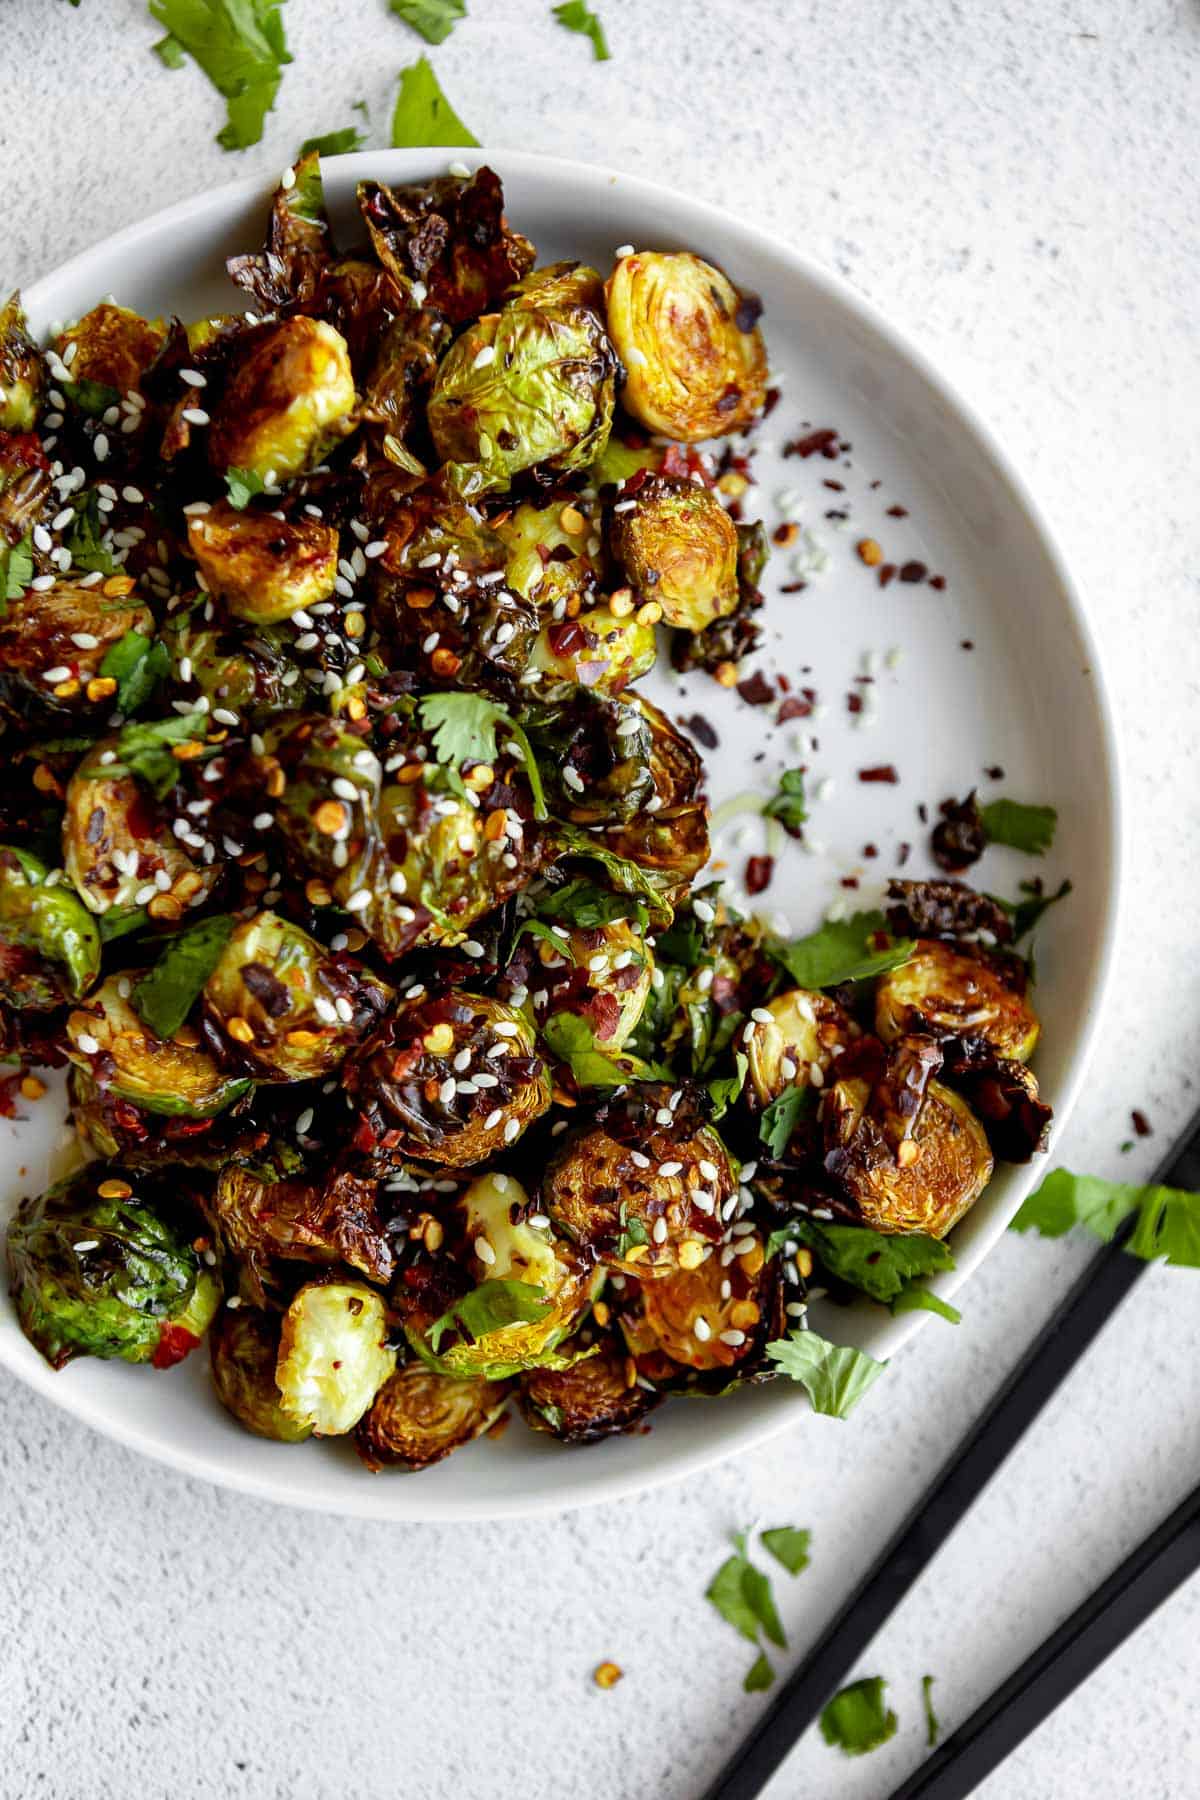 chili garlic brussels sprouts in air fryer on a plate